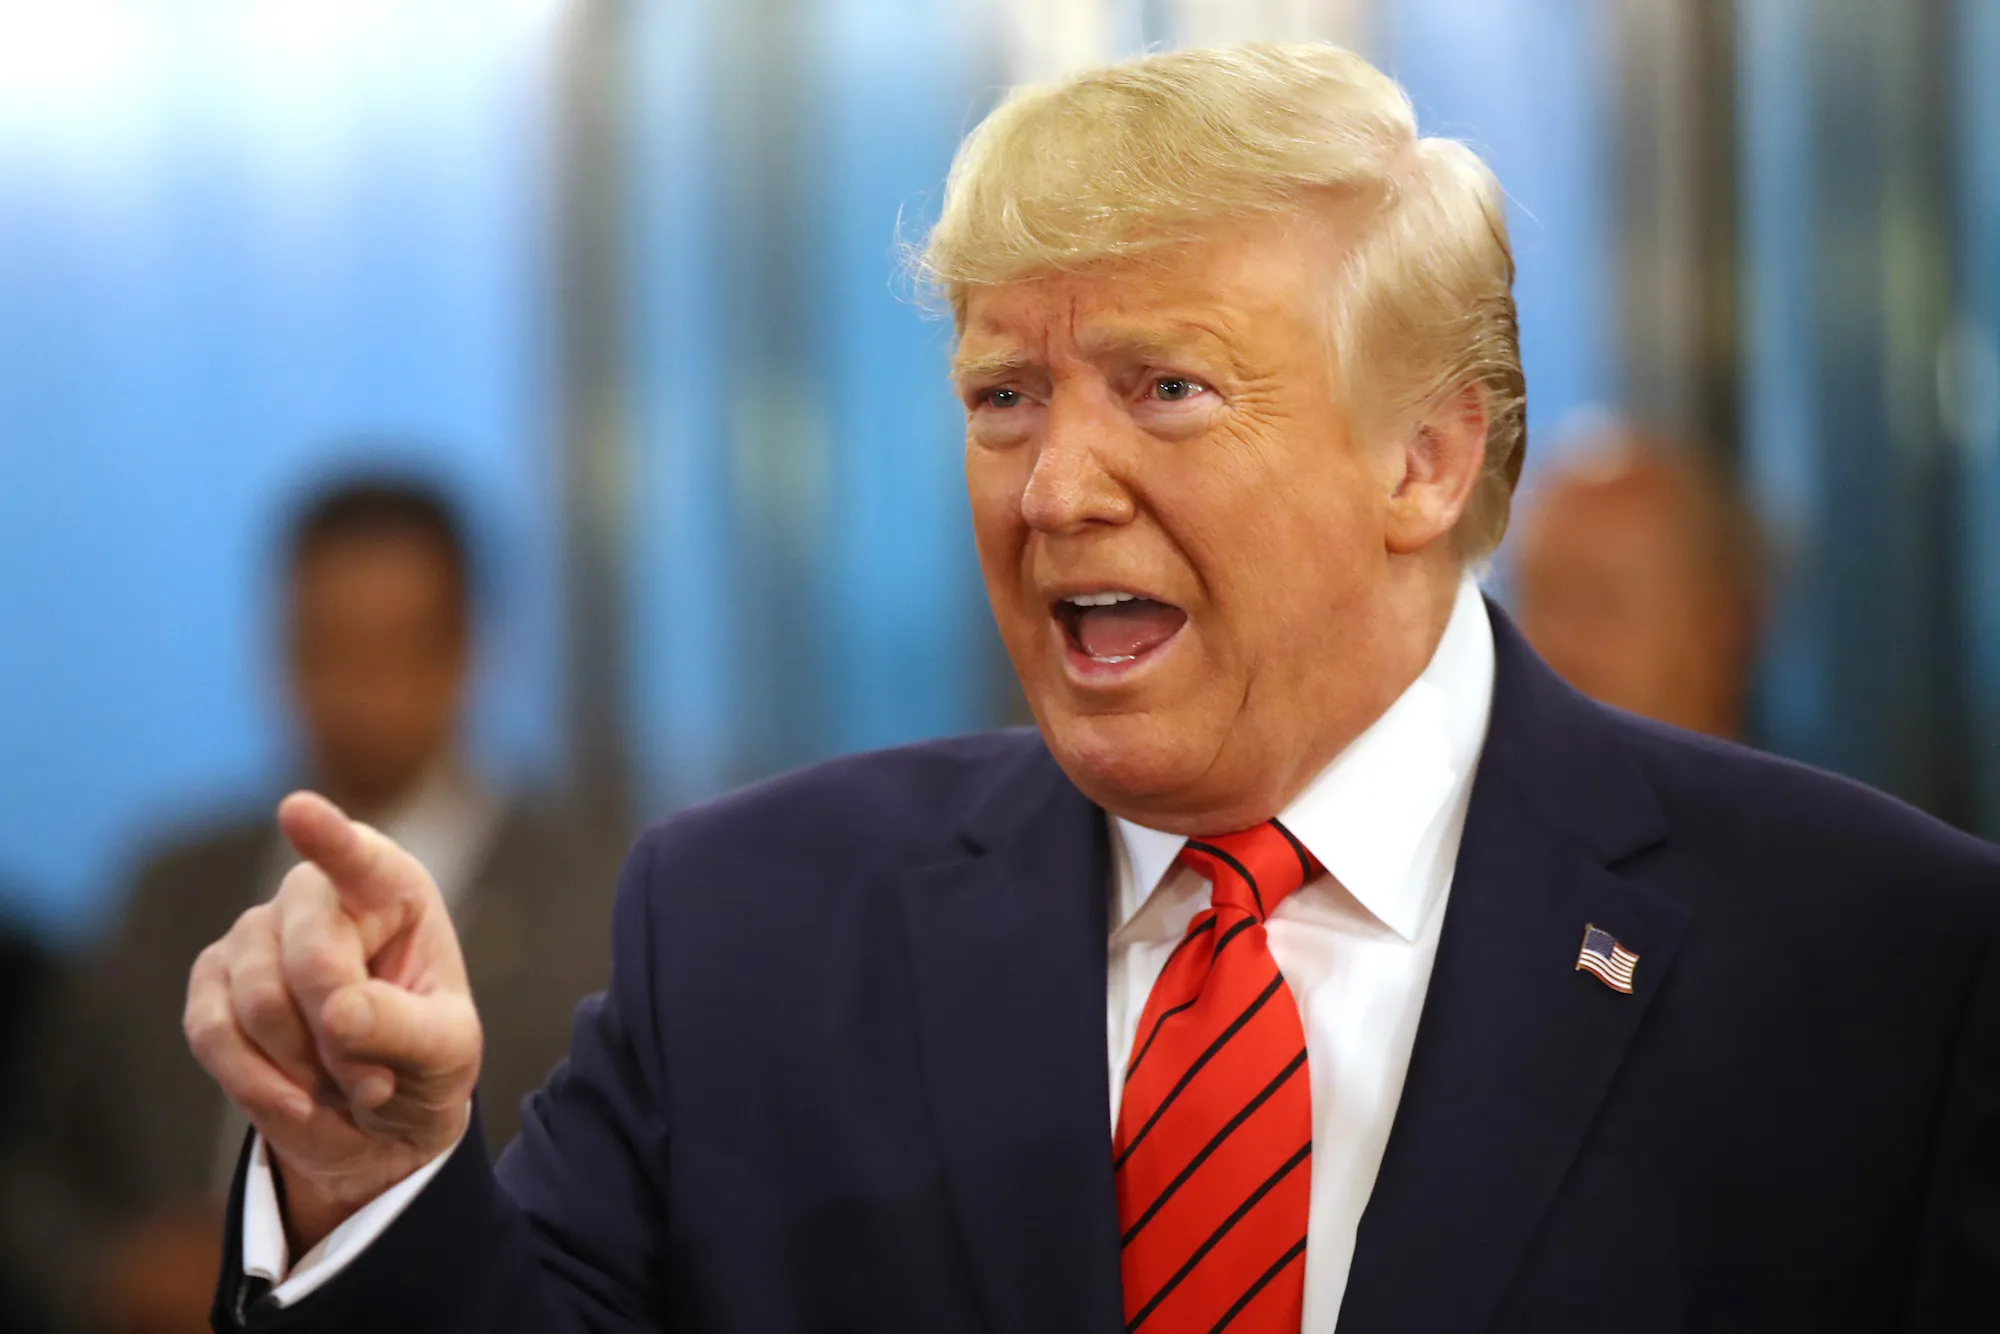 Trump Denies Accusations And “Fully Retracted Claims” From Epstein Victim